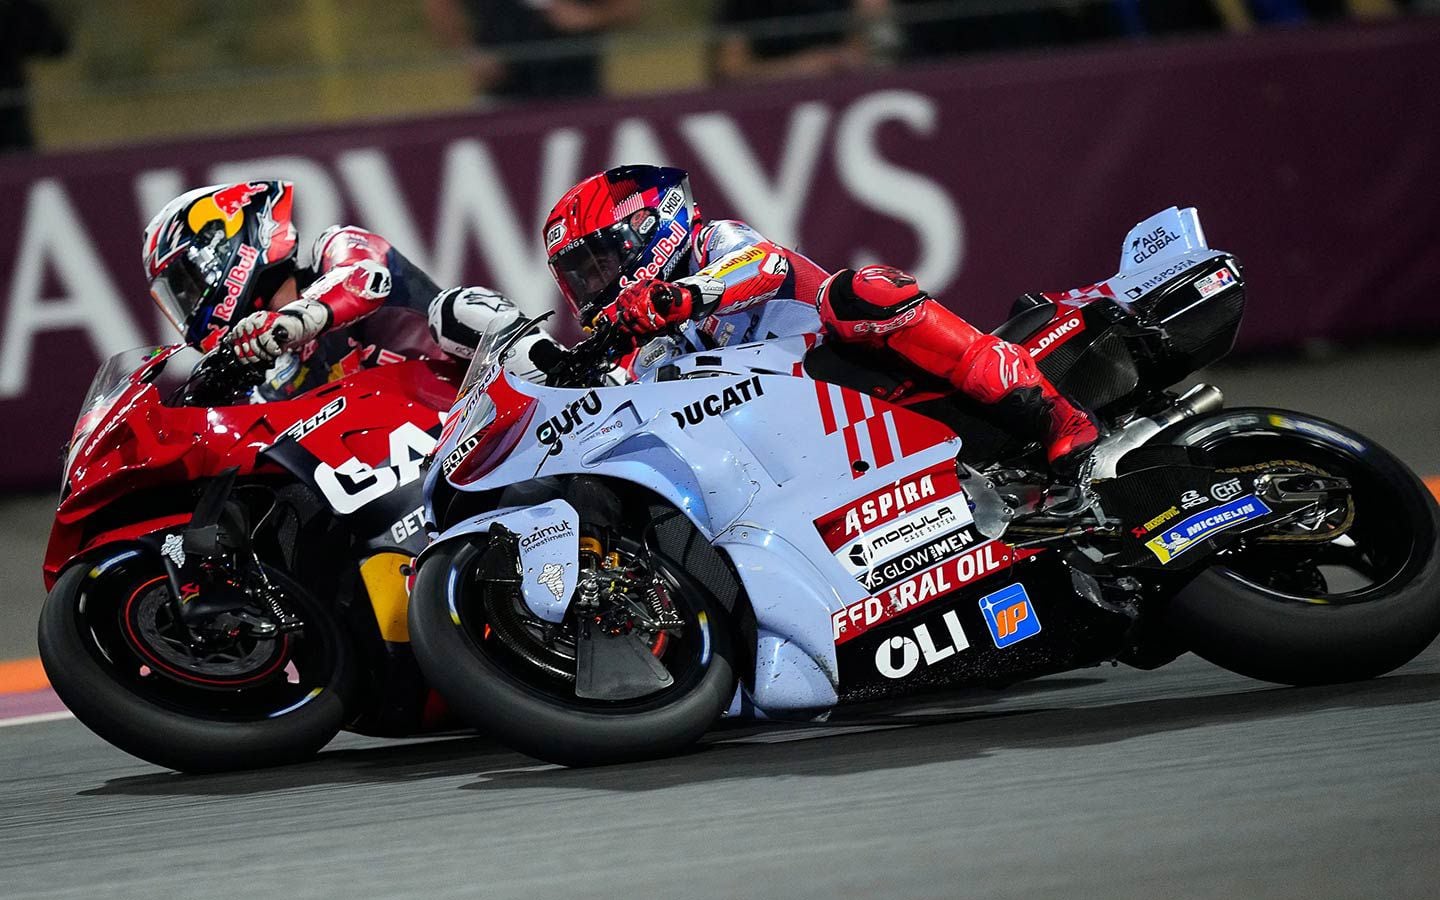 Pedro Acosta and Marc Márquez both put in impressive rides on their new machines.